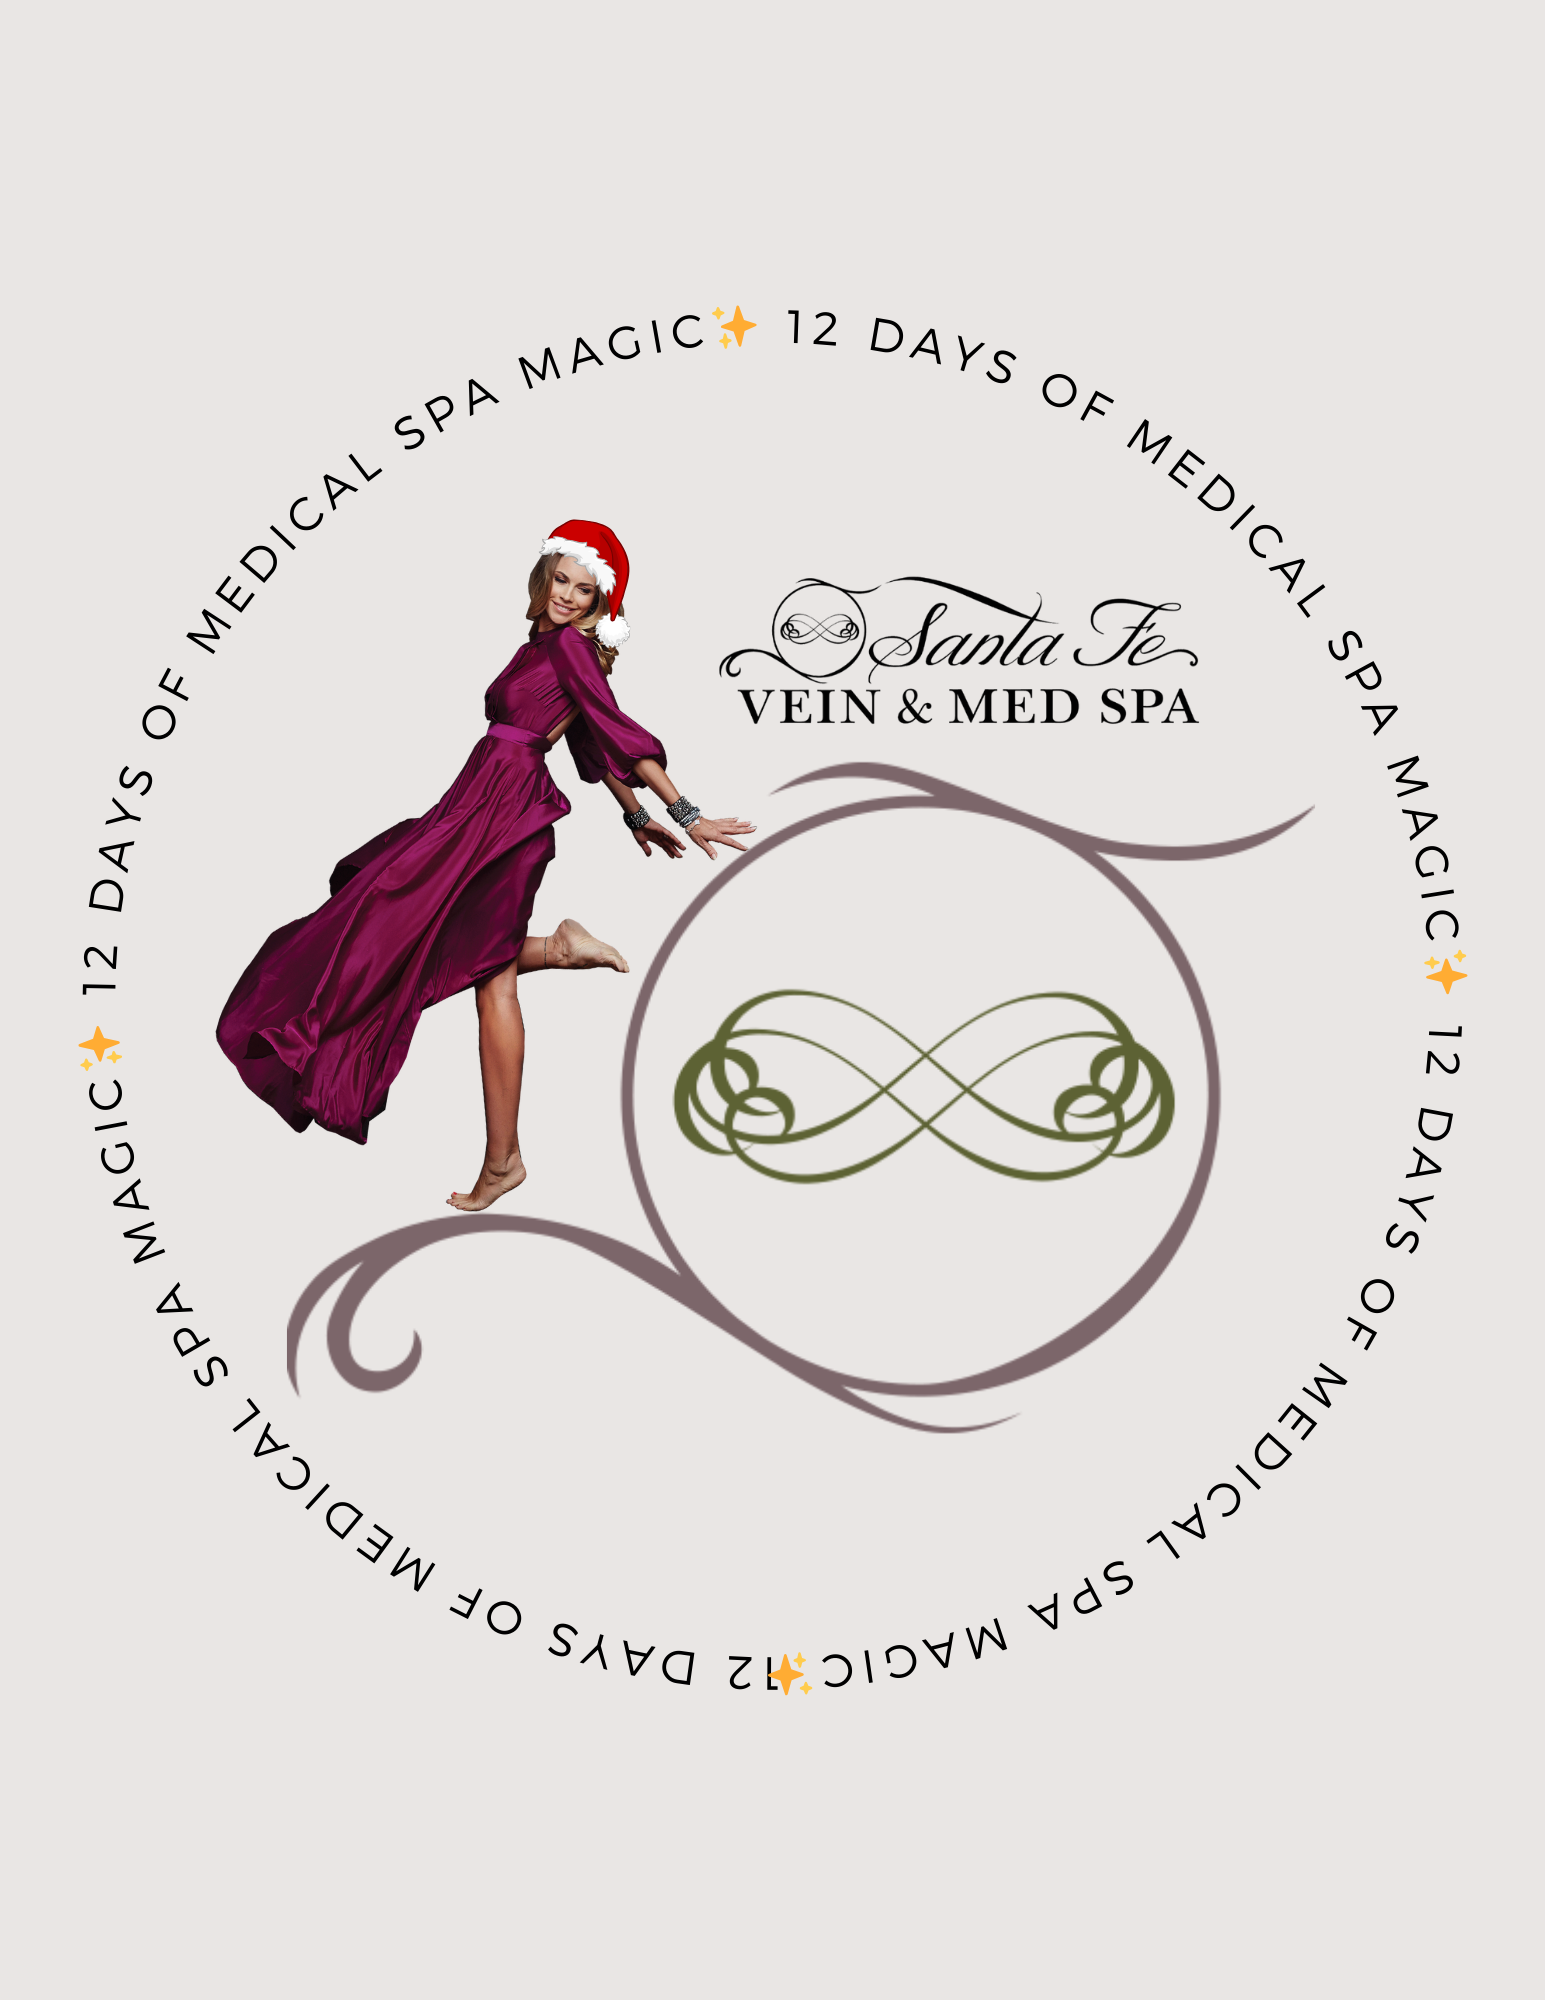 12 days of medical magic med spa special promo